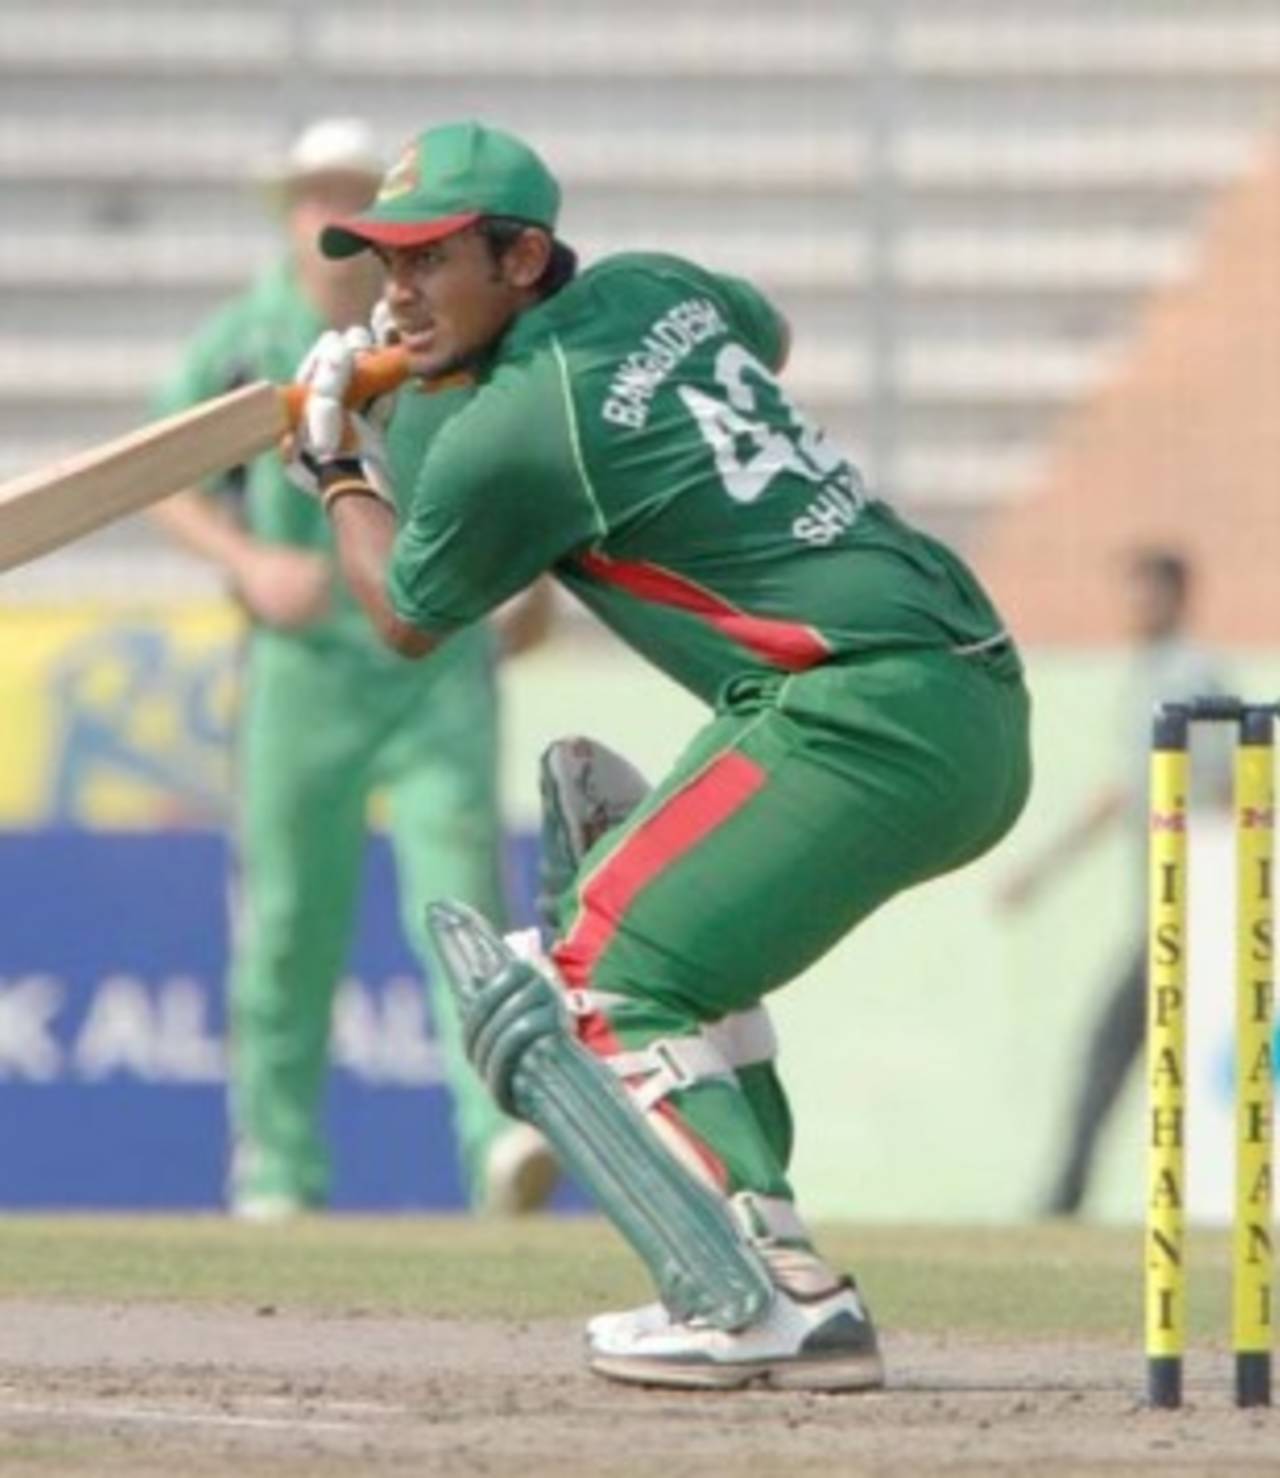 Tamim Iqbal's absence gave Shahriar Nafees another chance in ODIs&nbsp;&nbsp;&bull;&nbsp;&nbsp;TigerCricket.com